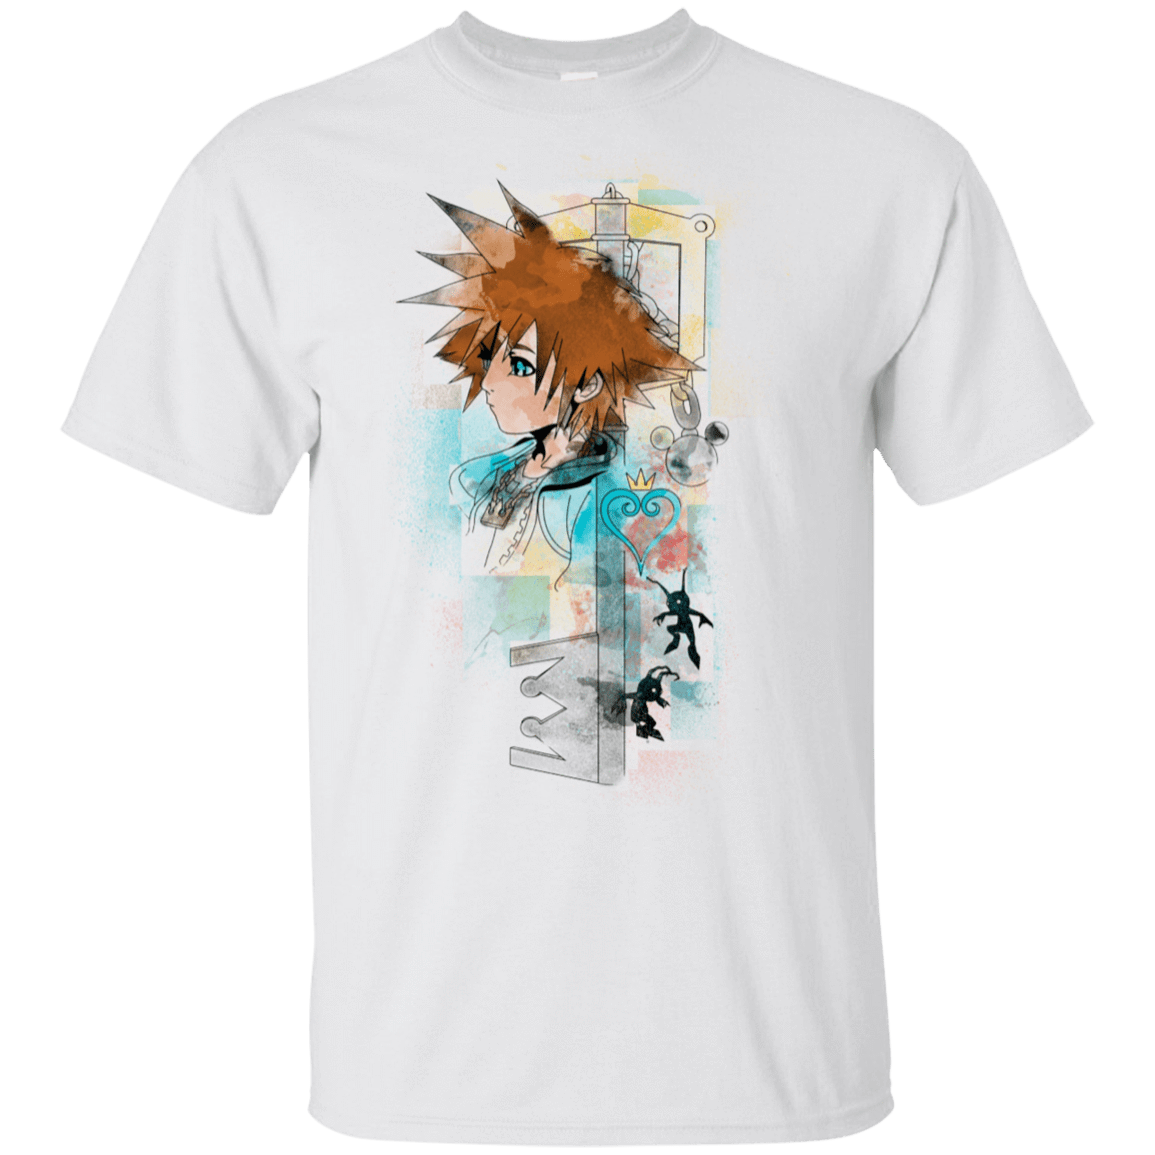 T-Shirts White / S Kingdom of Water Colors T-Shirt